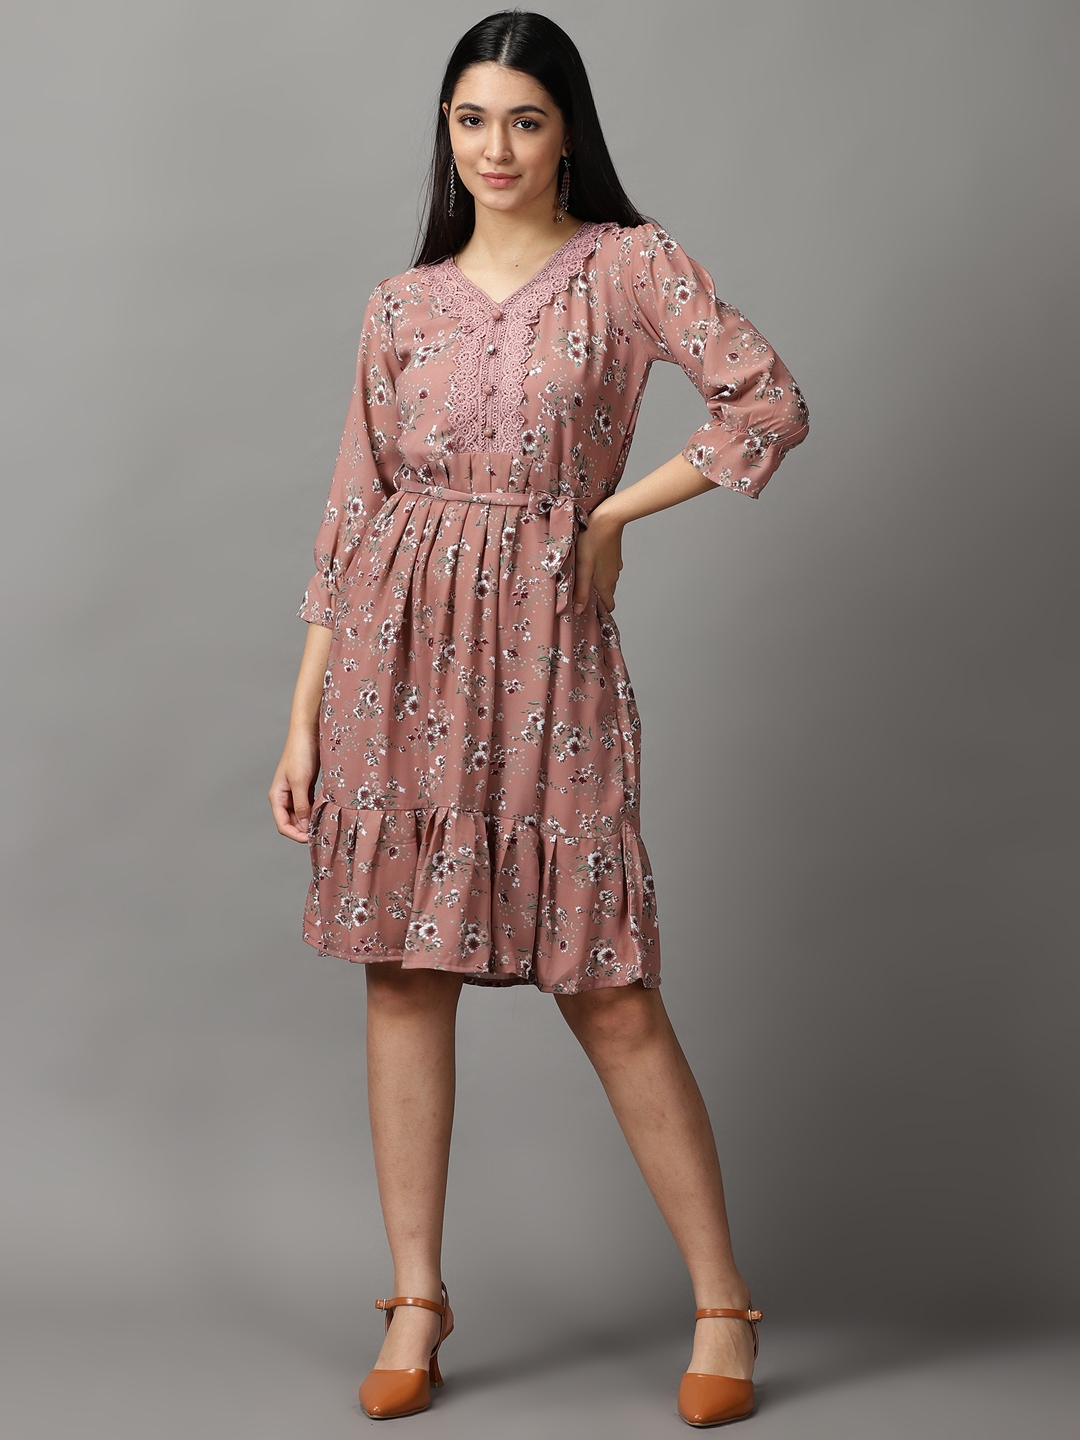 Showoff | SHOWOFF Women Mauve Printed Round Neck Short Sleeves Knee length Fit and Flare Dress 1